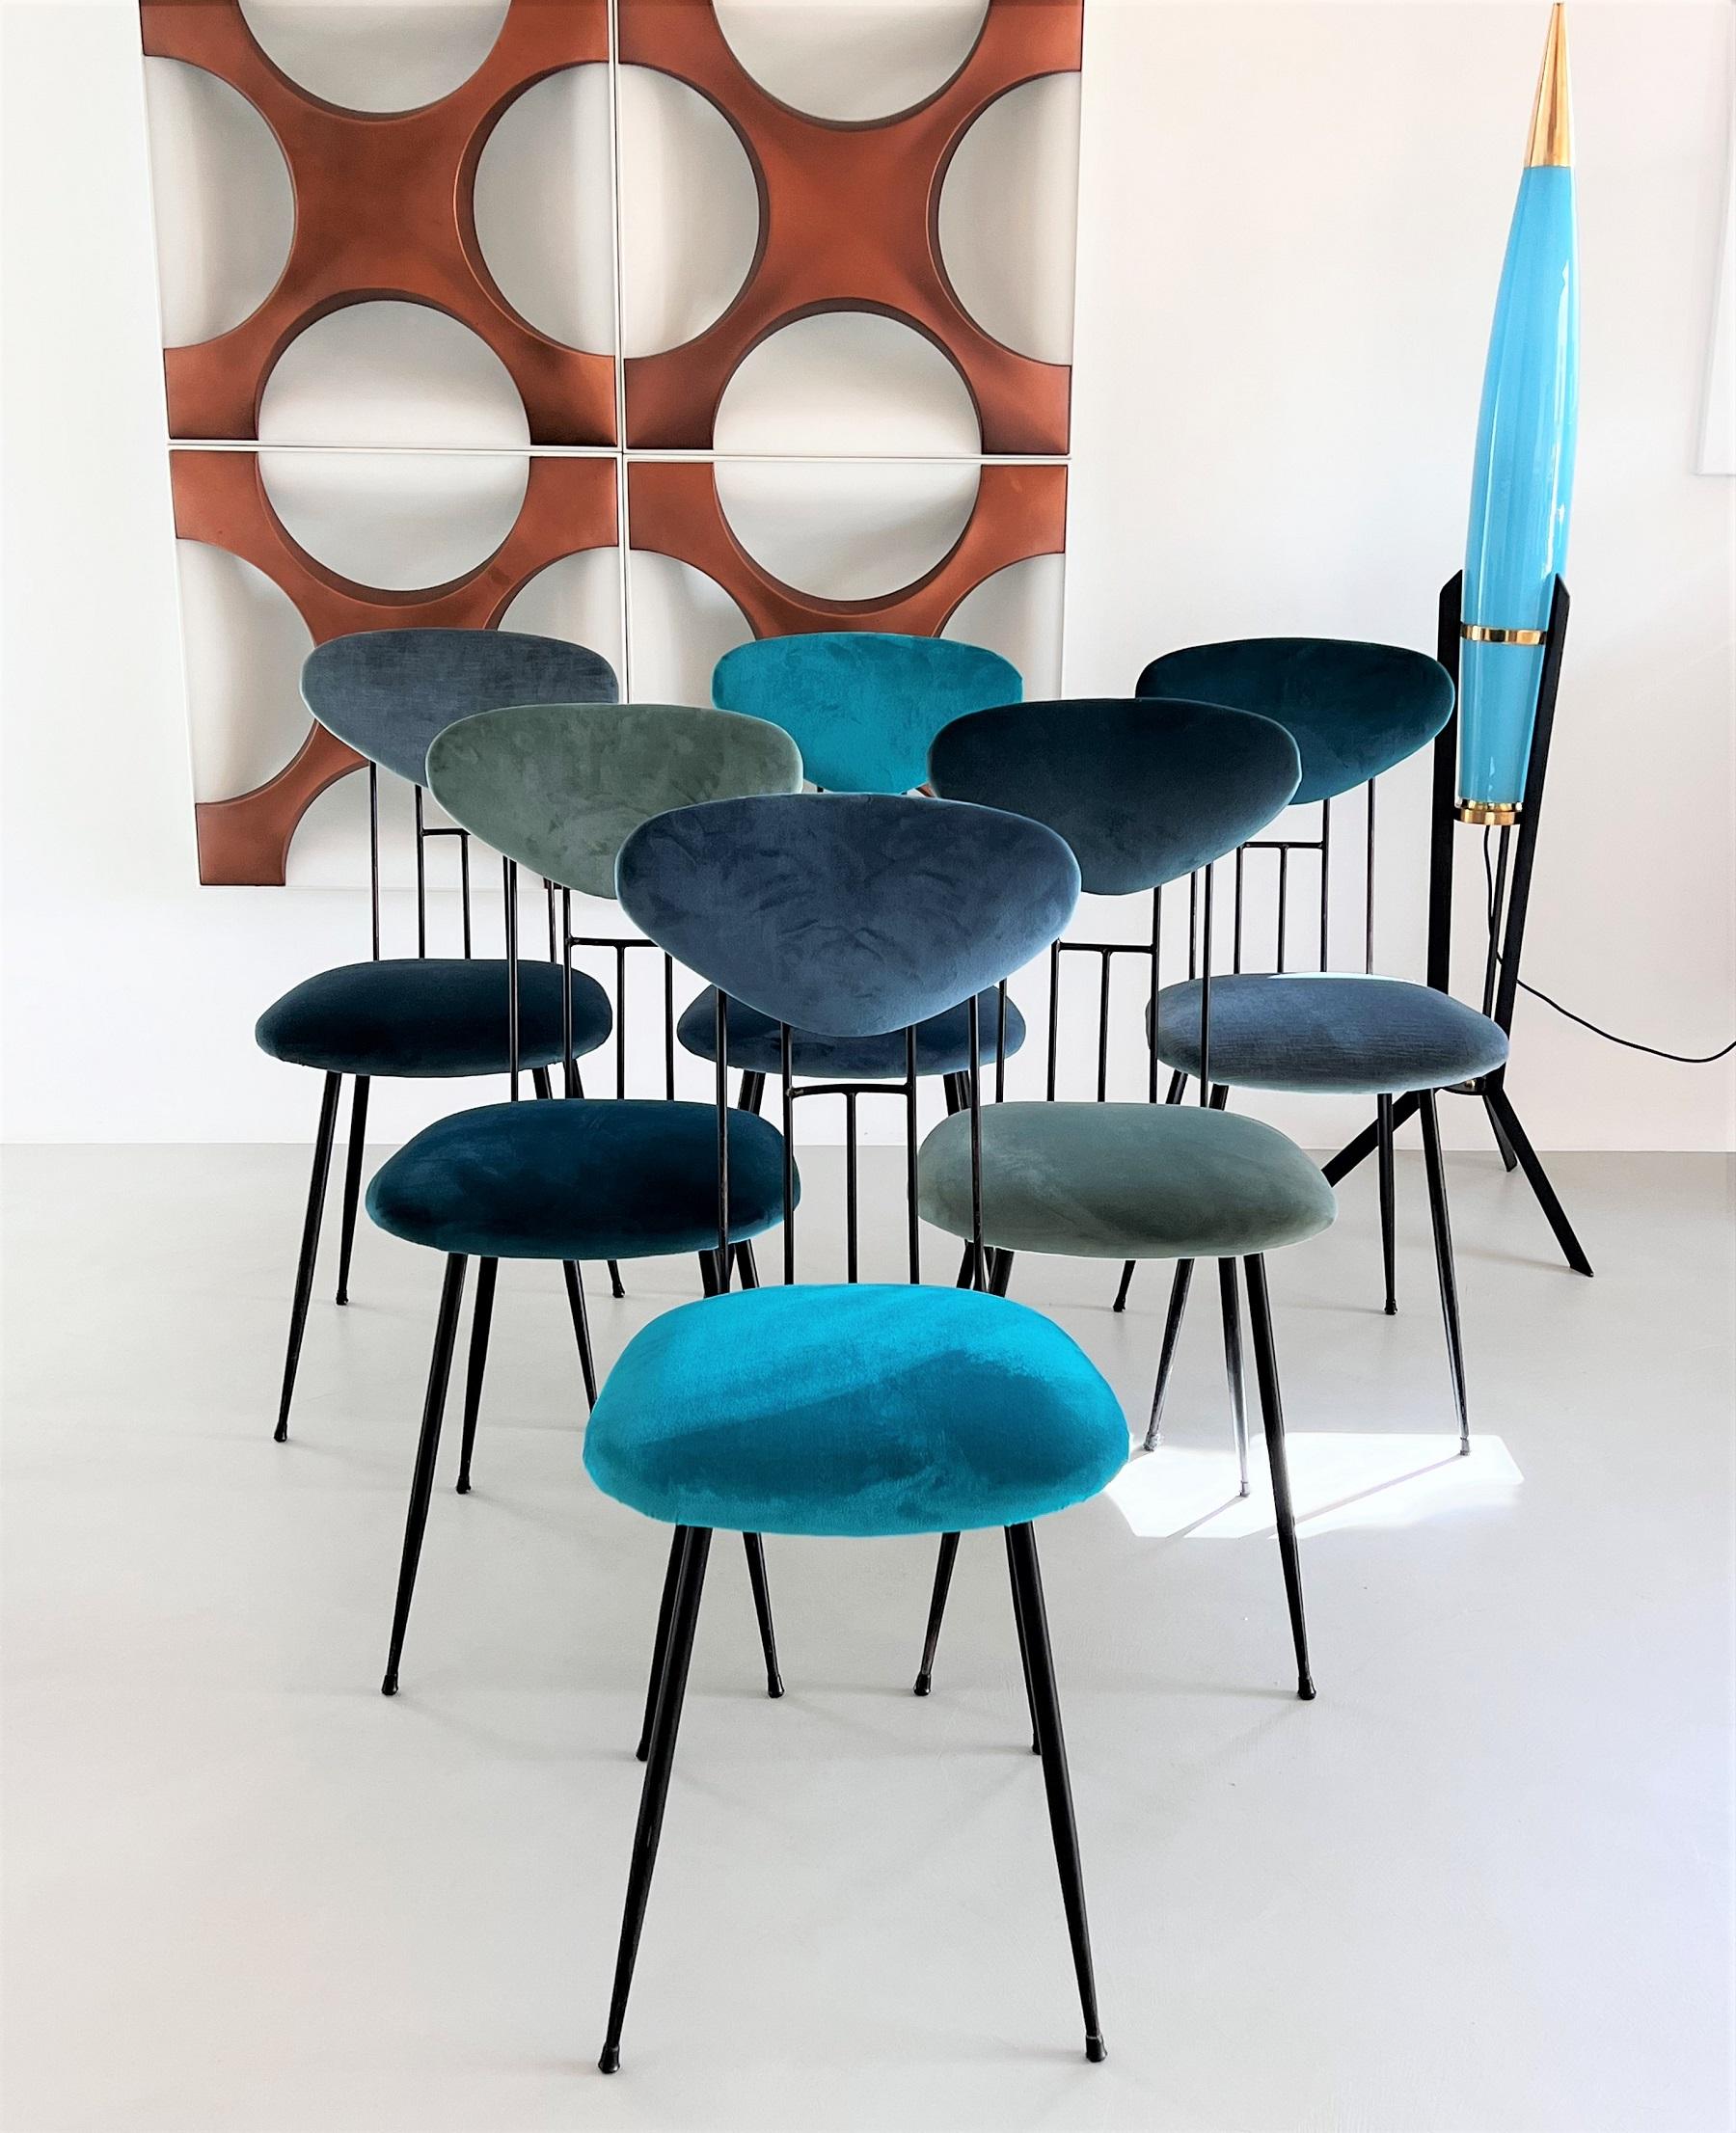 Italian Midcentury Dining Room Chairs Re-Upholstered in Velvet, 1960s In Good Condition For Sale In Morazzone, Varese